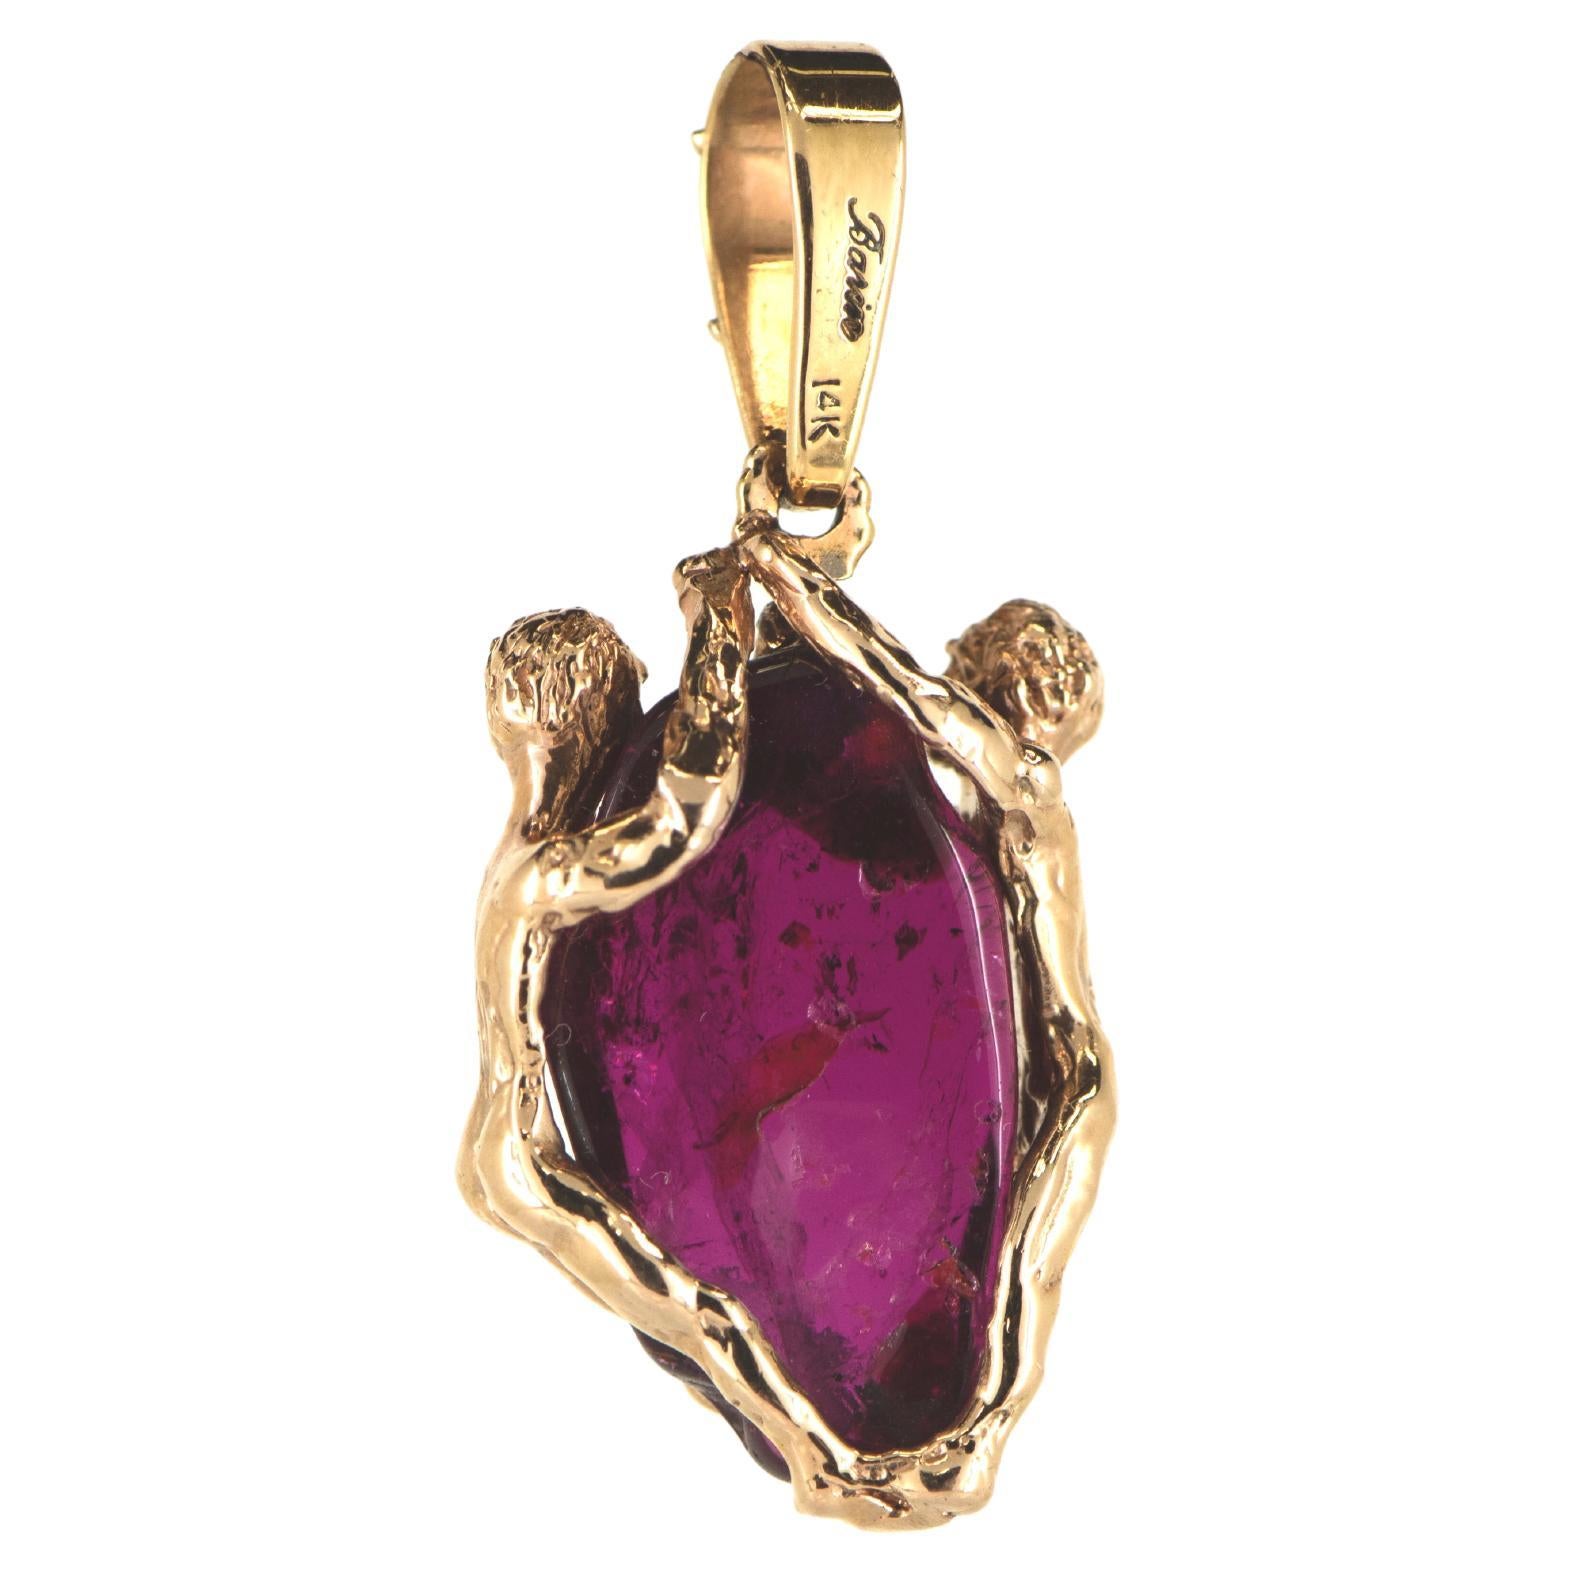 This stunning 14 Karat Rose Gold pendant is a true embodiment of true love and connection. At the heart of the pendant lies a mesmerizing Tourmaline, a stone that is renowned for its stunning color and spiritual properties.

Tourmaline is considered